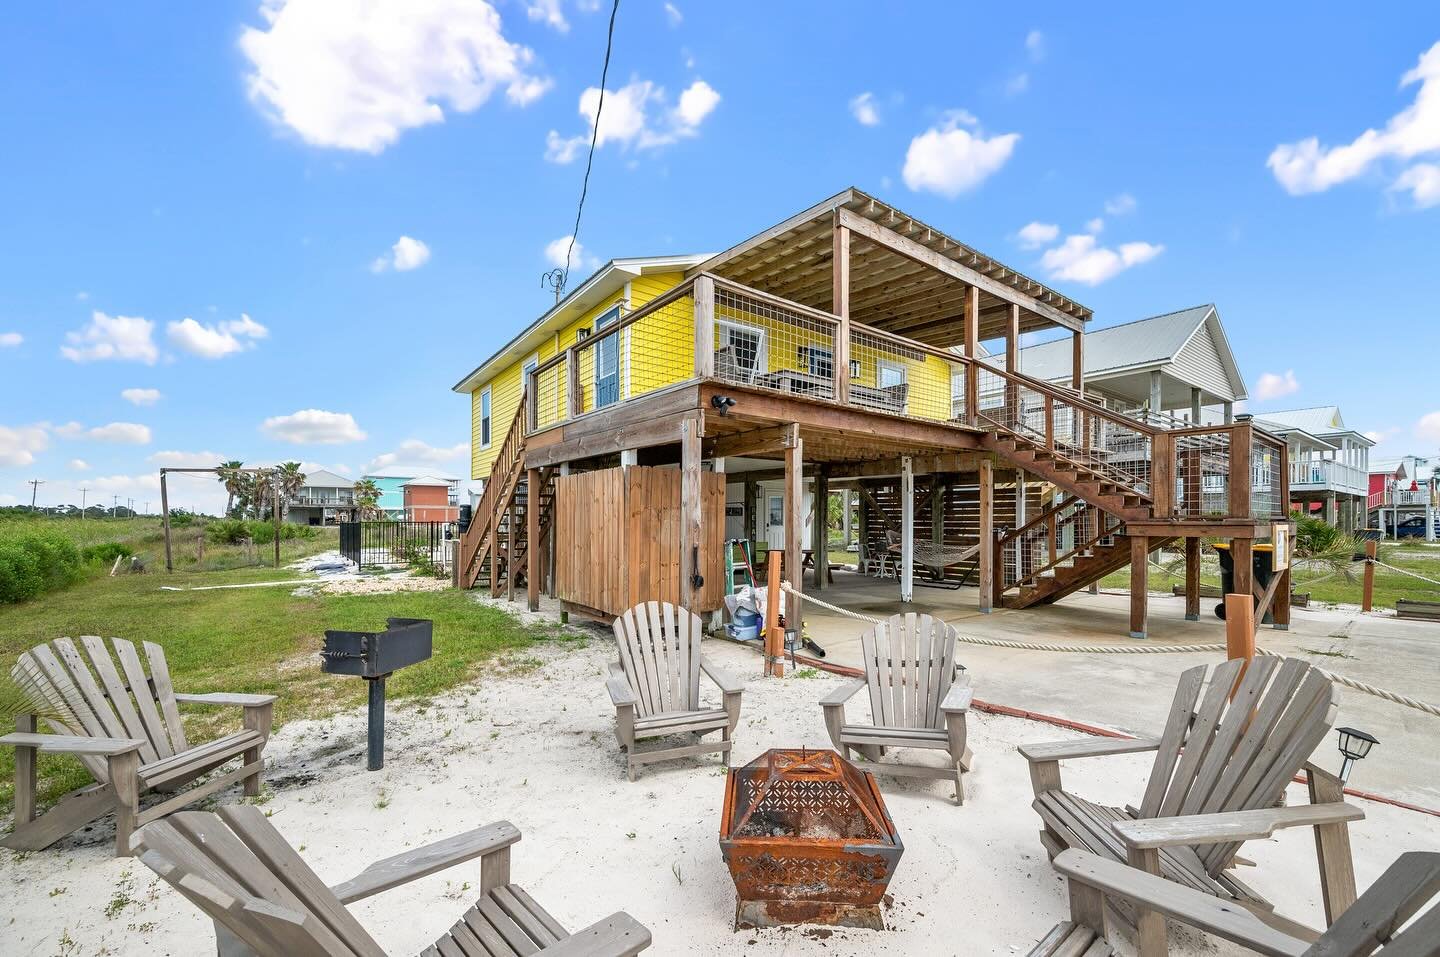 We still have a few openings for @hangoutfest ⭐️Gulf Shores May 17th, 18th, &amp; 19th⭐️ Hit us up to find out about pricing for the below homes on the Emerald Coast! ⬇️
⭐️Beach Boyds - offers a pool and firepit for post fest fun.
⭐️Big Beach Bungalo